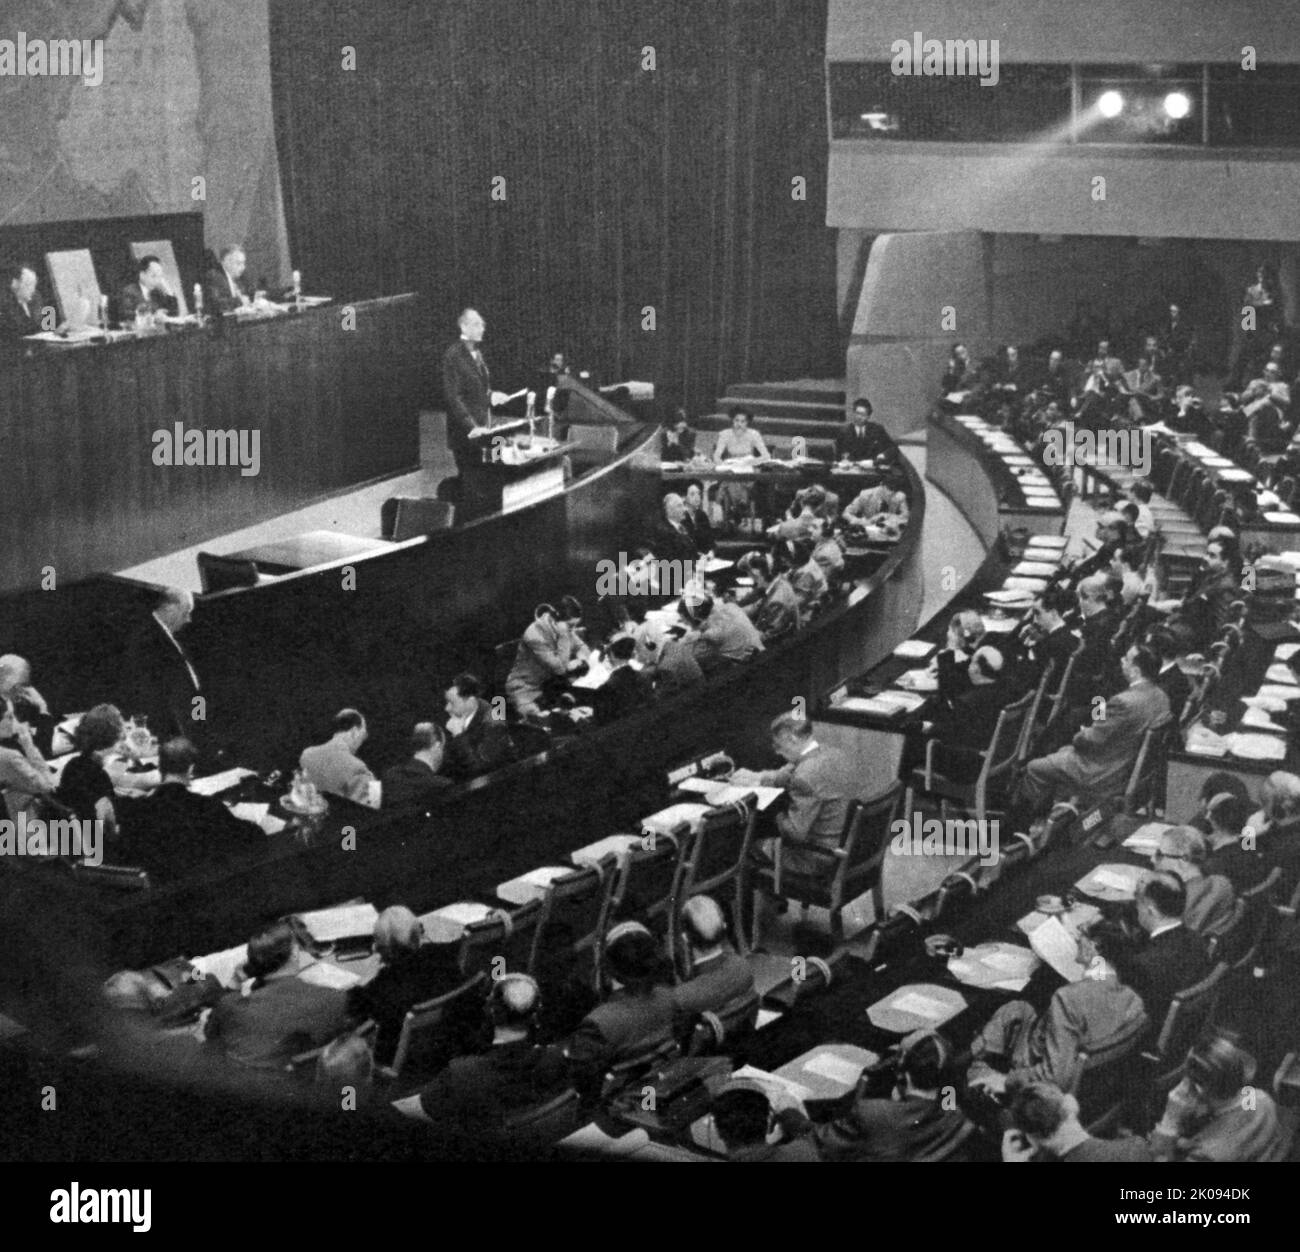 The Fifty Nine Nations assembly at the General Assembly Hall at Flushing Meadow, New York on Saturday, 29 November 1947. Photograph of Mr Acheson, US Secretary of State addressing the assembly. Stock Photo